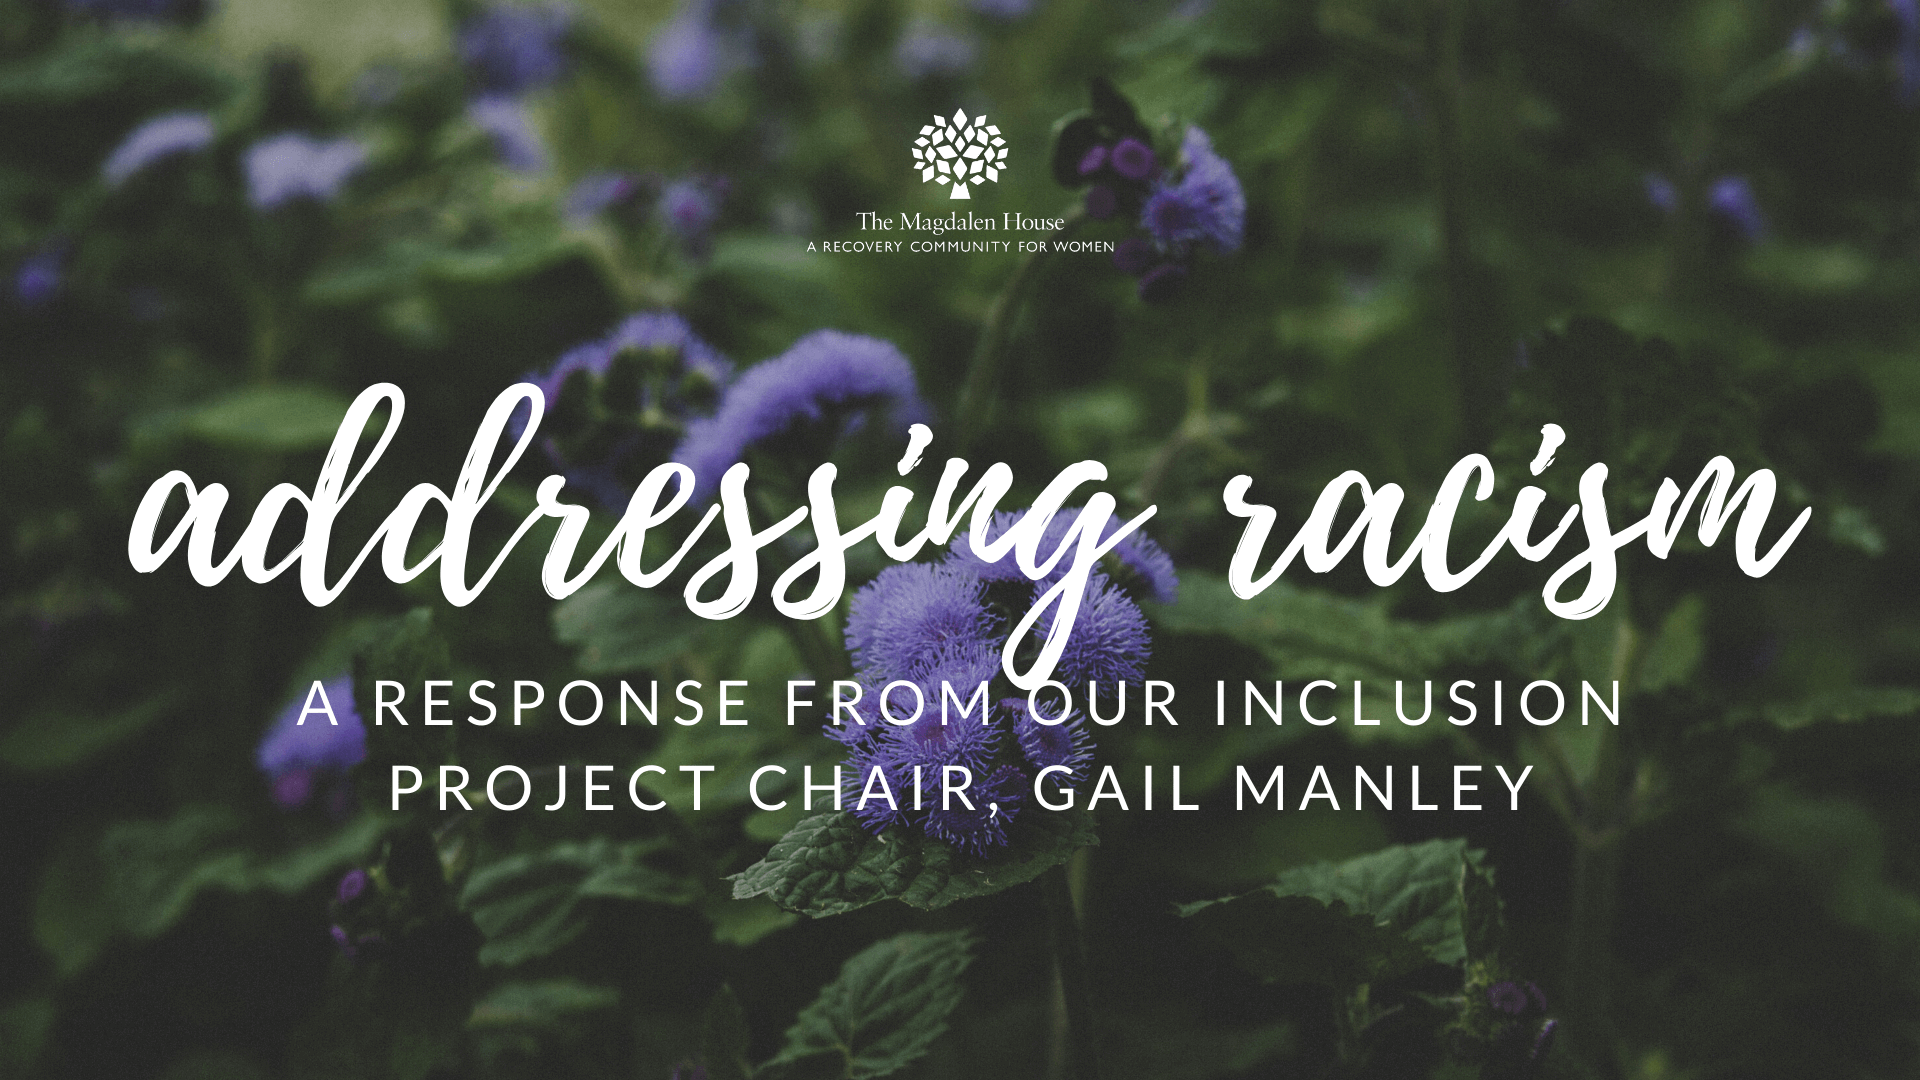 A Response to the “Addressing Racism” Letter, from Our Inclusion Project Chair Gail Manley